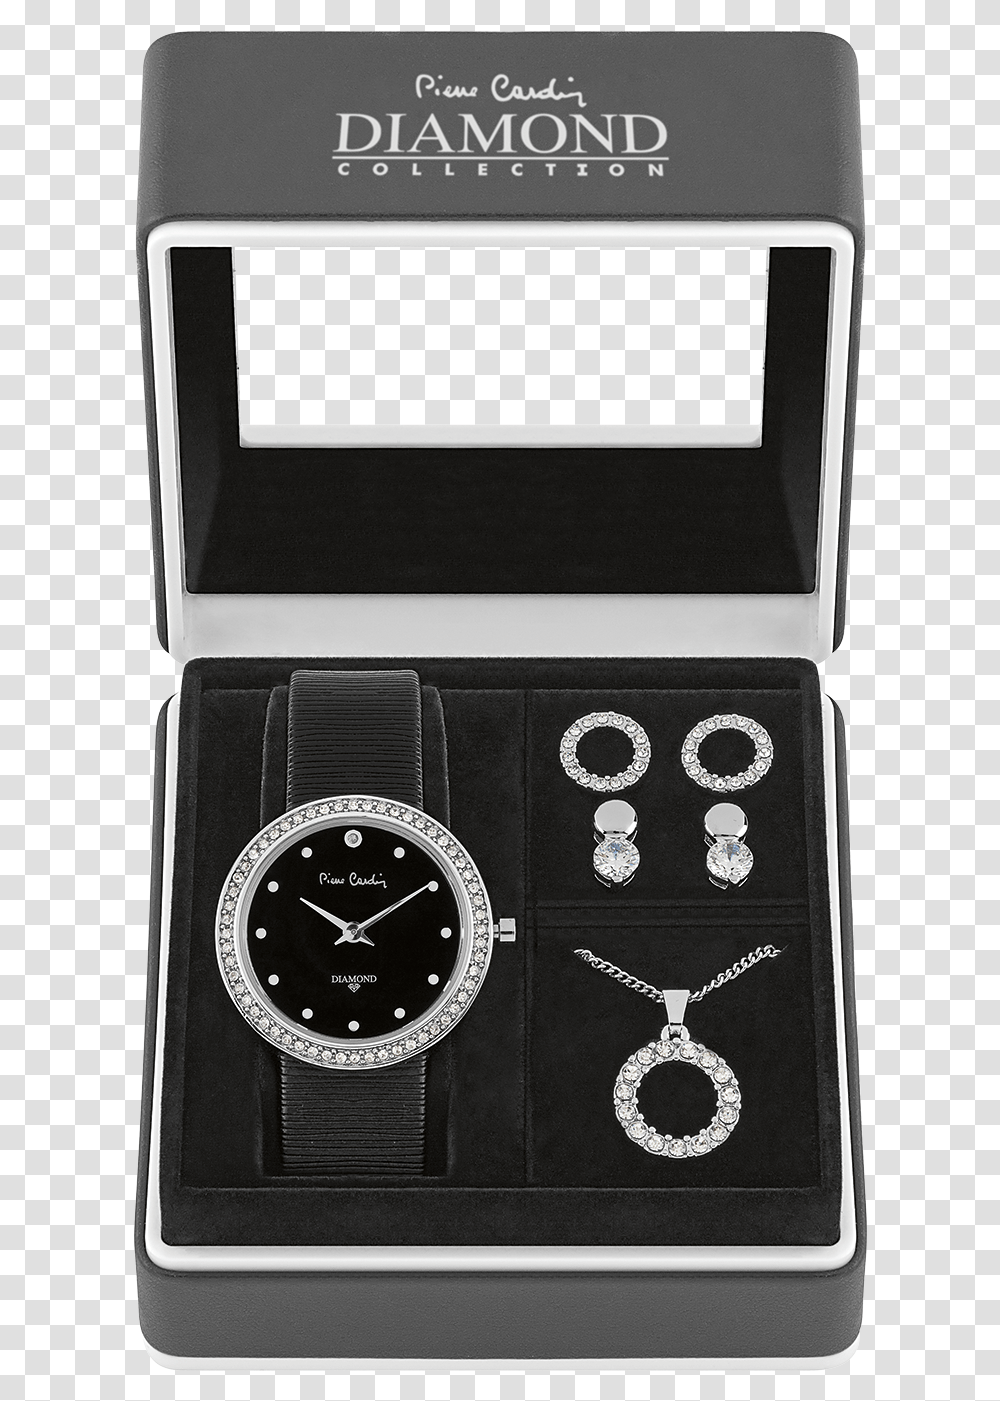 Pierre Cardin Watches Diamond Collection Price, Analog Clock, Mobile Phone, Electronics, Cell Phone Transparent Png